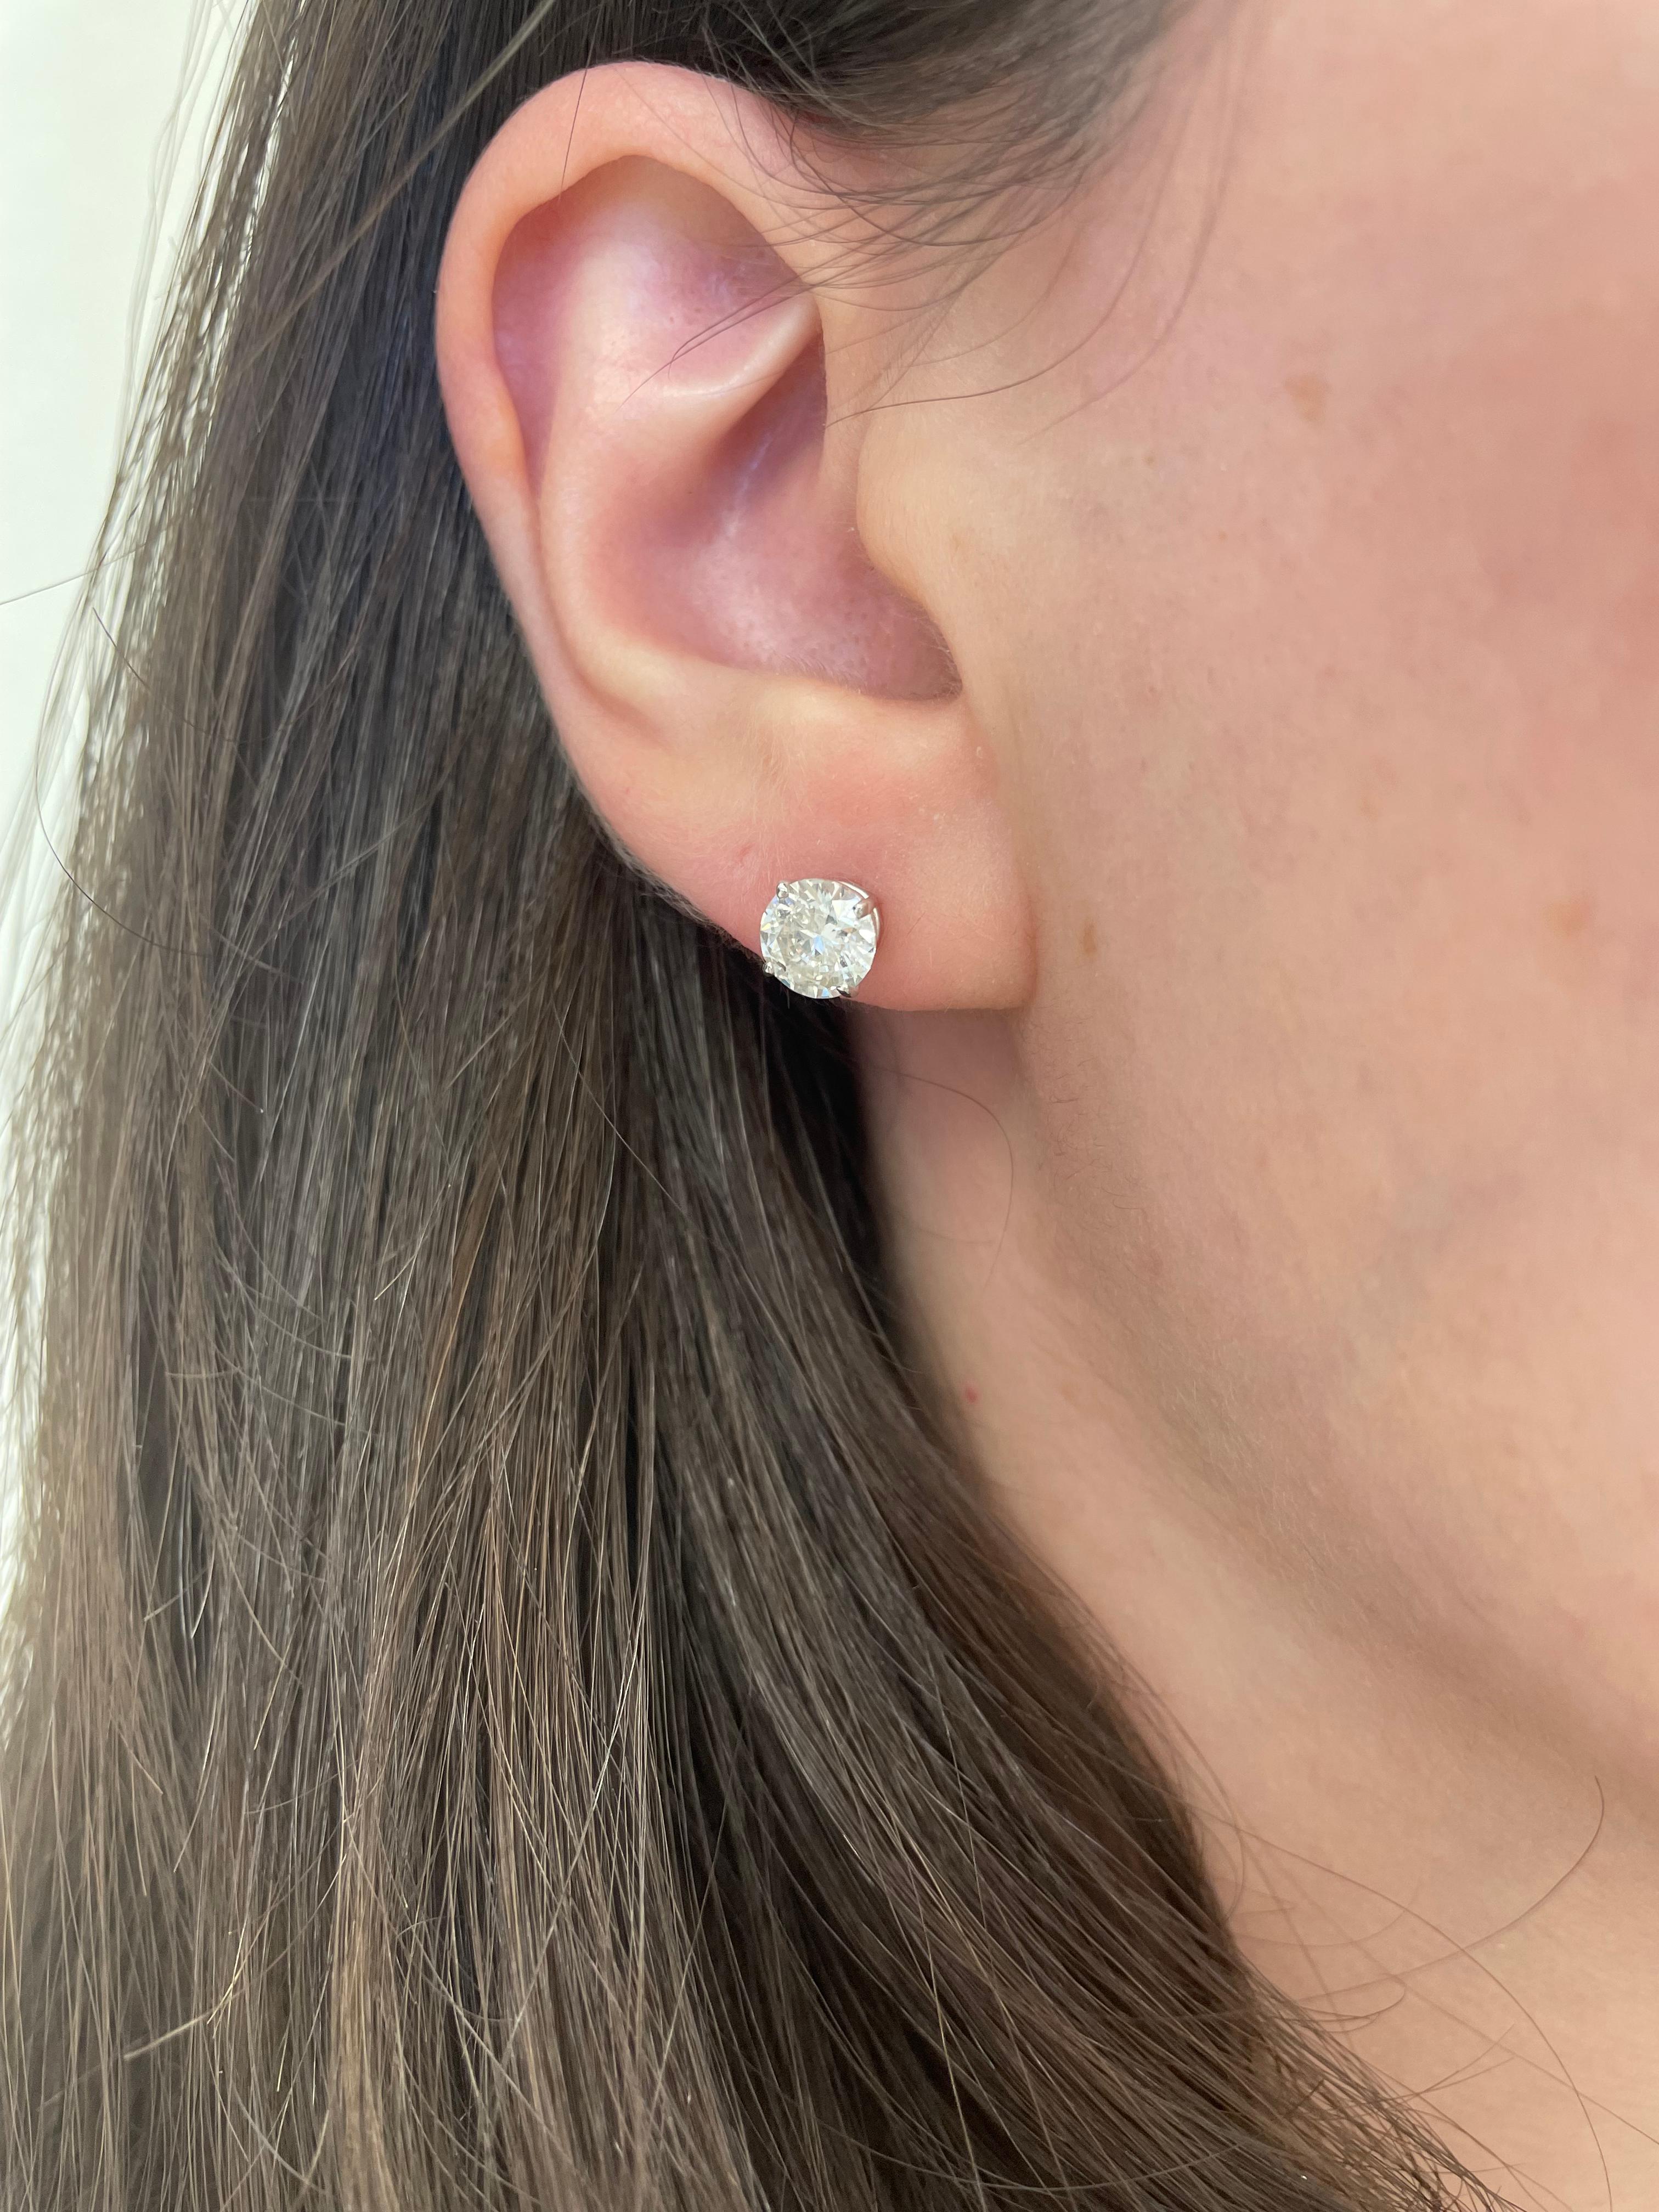 Classic diamond stud earrings, each stone EGL certified, by Alexander Beverly Hills.
Two matching round brilliant diamonds 2.02 carats total. Both stones G color grad and SI3 clarity grade. 14k white gold, 1.46 grams.
Accommodated with an up to date